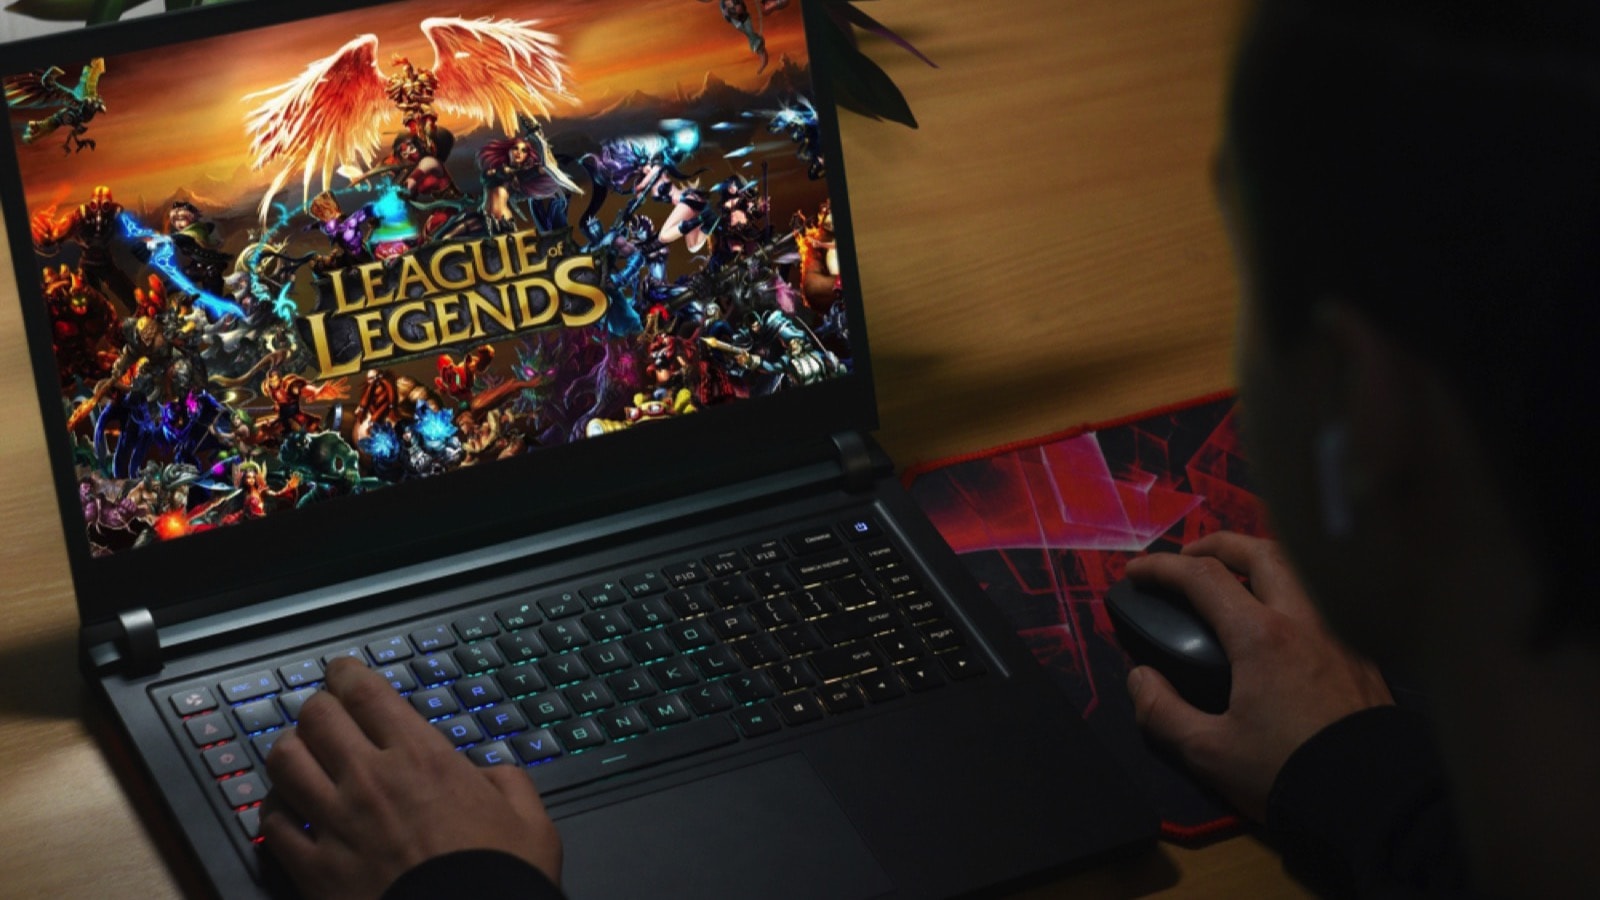 League of Legends video game